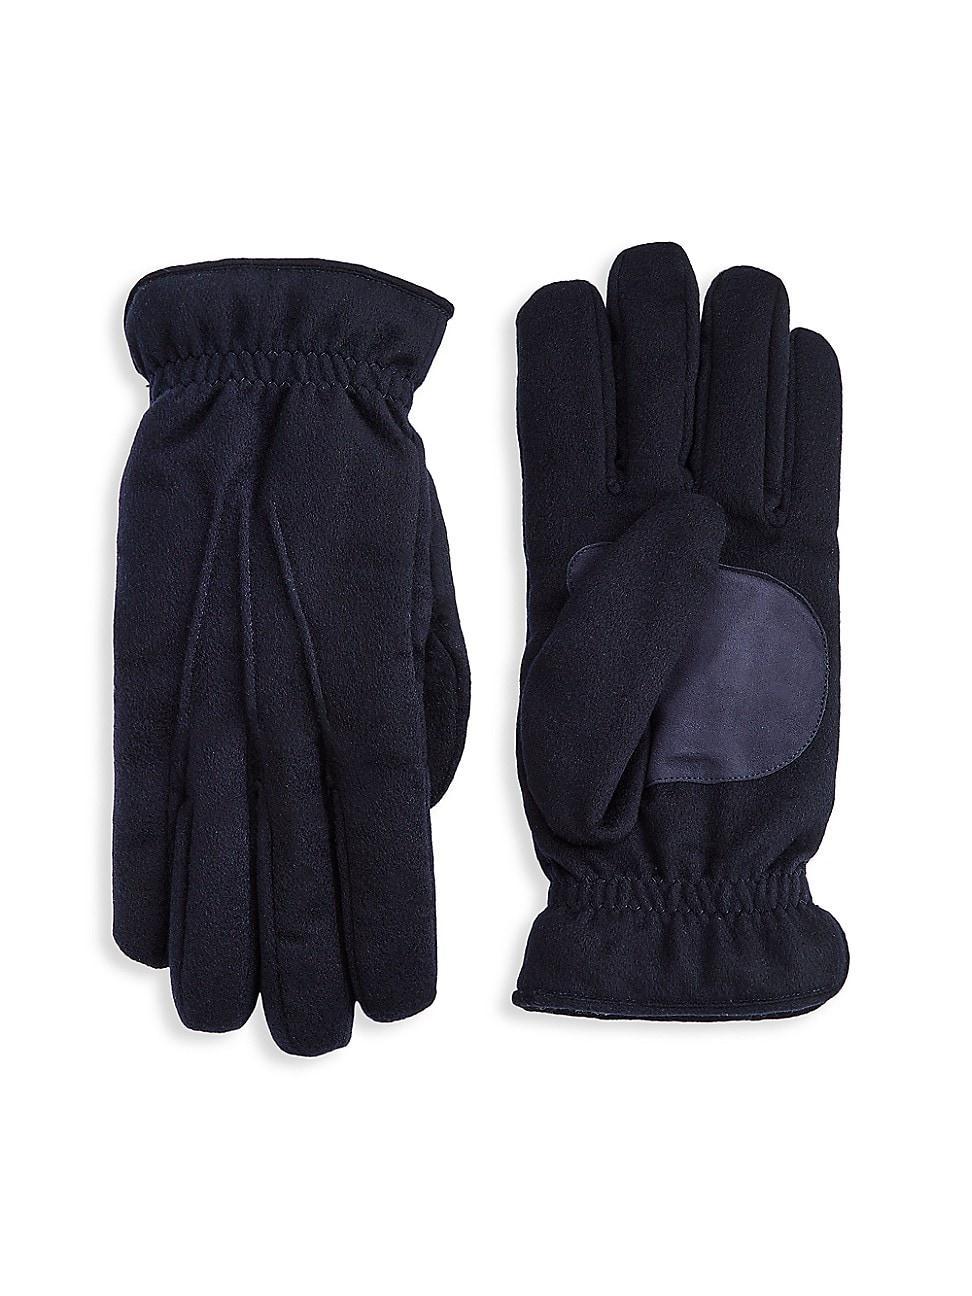 Mens Ashford Cashmere & Suede Gloves Product Image